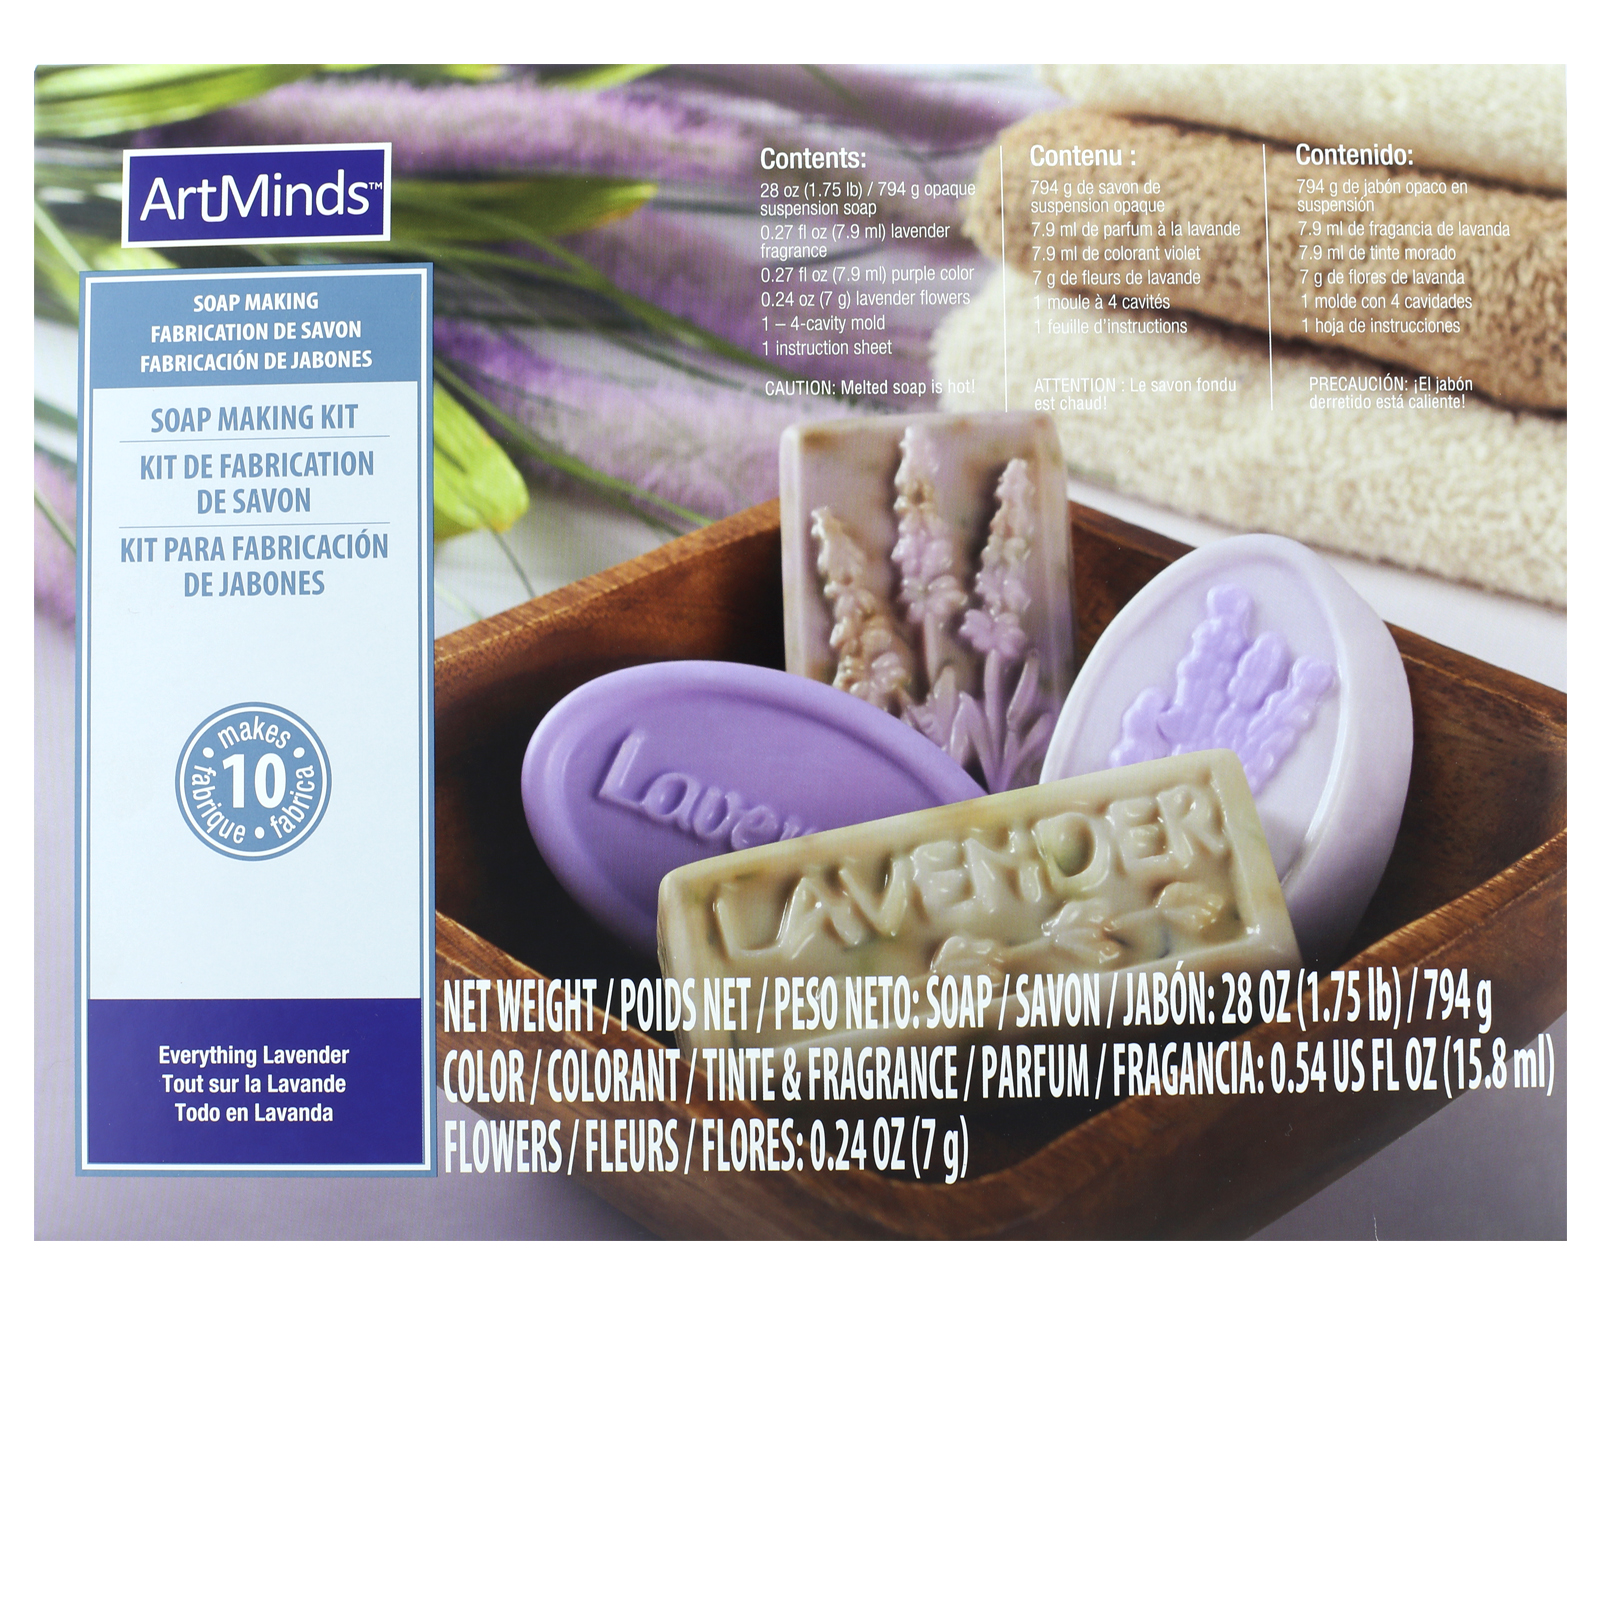 Download Find the Everything Lavender Soap Making Kit by ArtMinds™ at Michaels